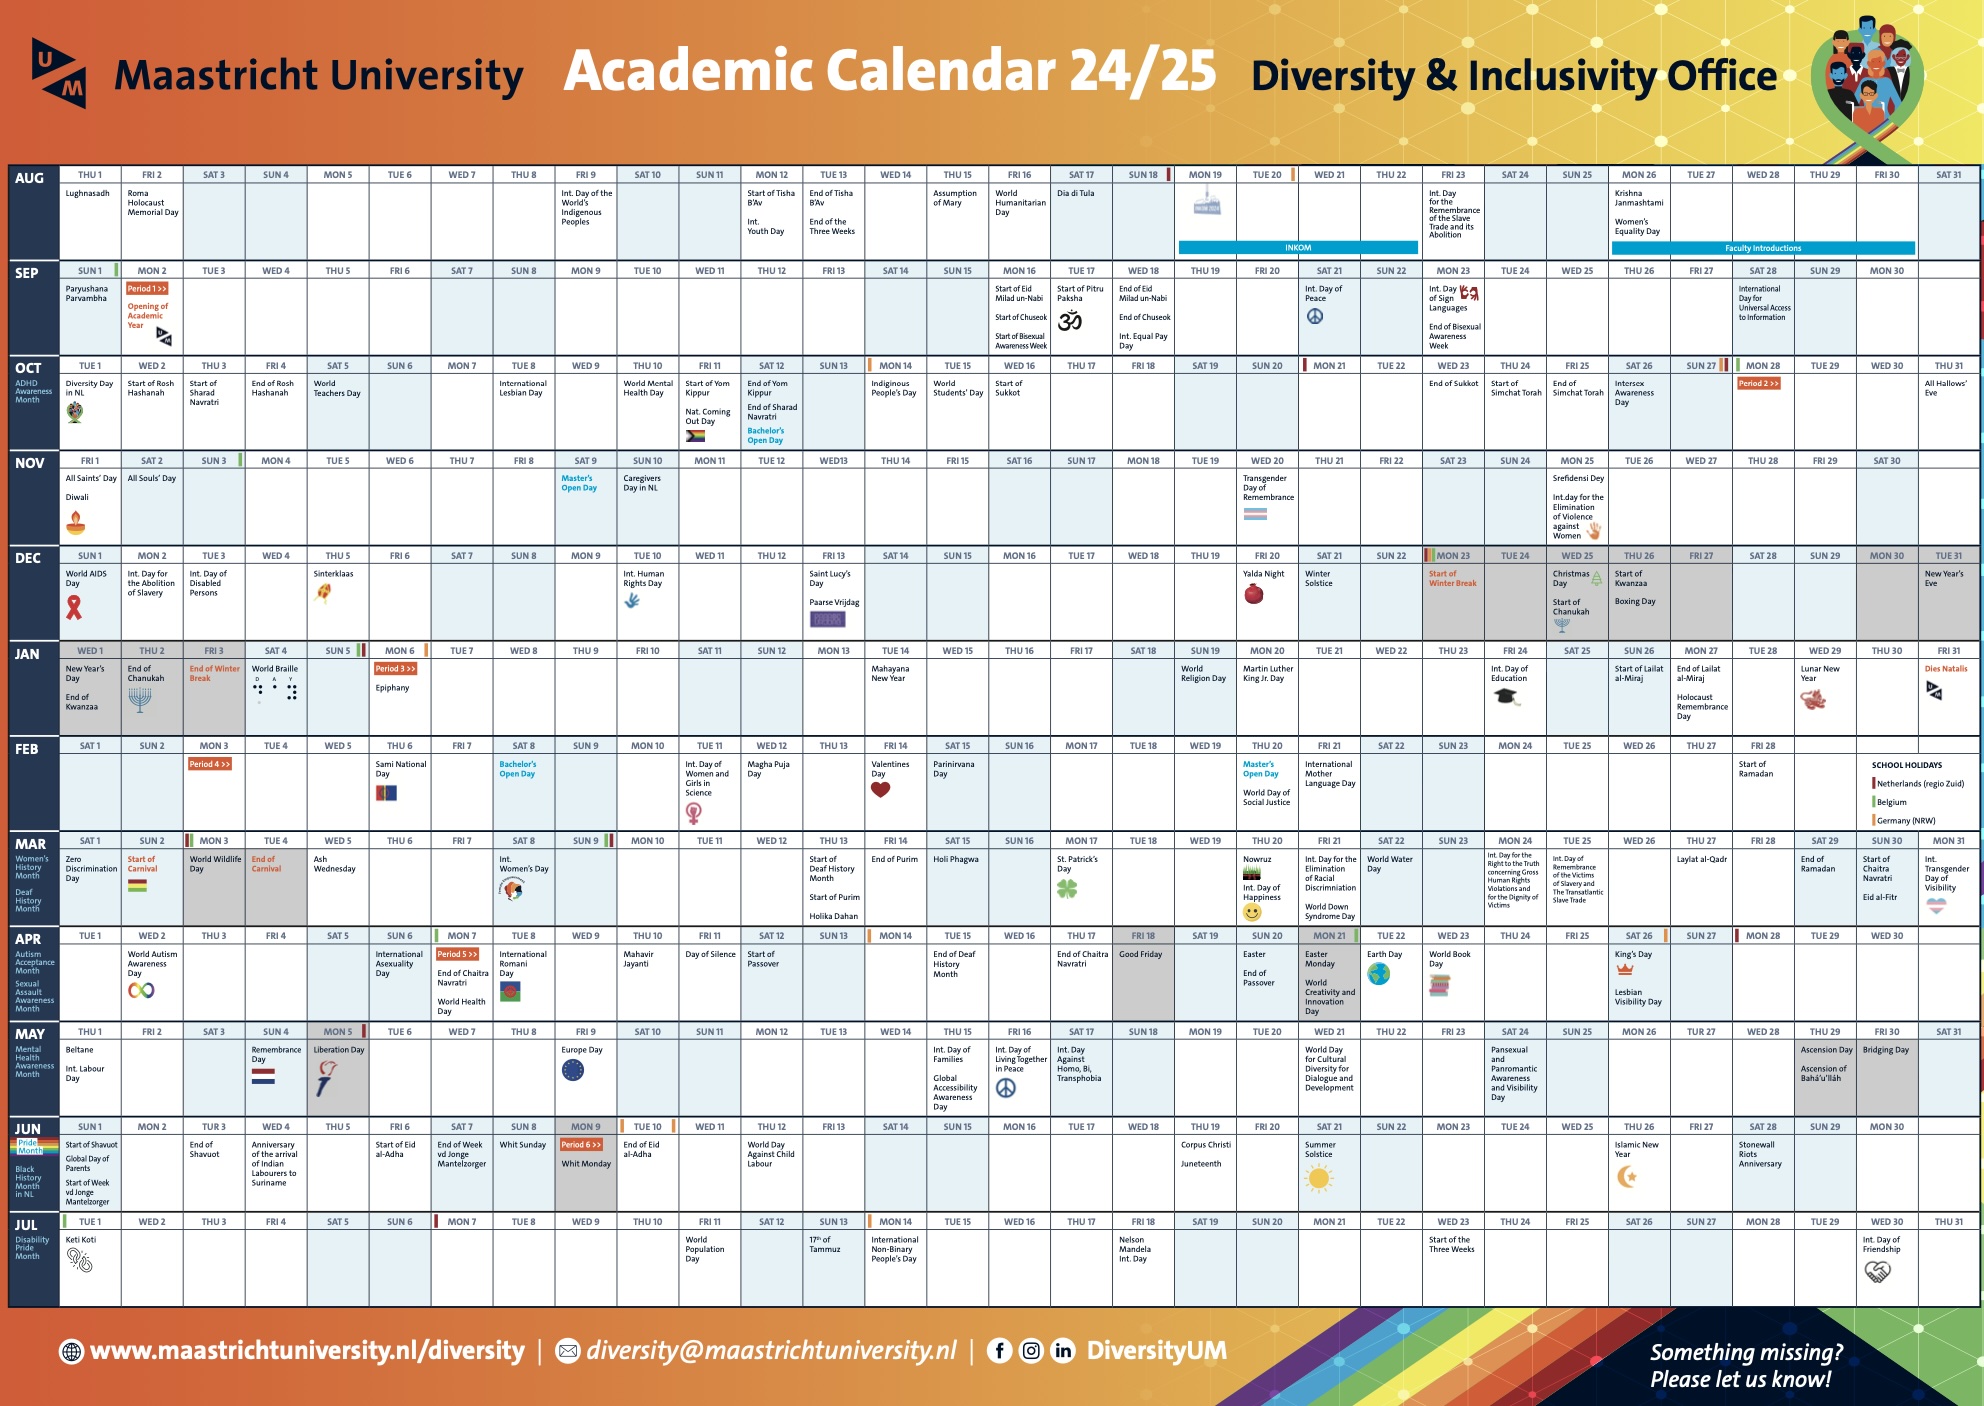 This is a diversity and inclusivity academic calendar for the academic year 2024-2025. It lists significant dates and holidays from August 2024 to July 2025, highlighting various cultural, religious, and international observances such as Lughnasadh, Holocaust Memorial Day, International Day of the World's Indigenous Peoples, Assumption of Mary, and many others. Each month is displayed with corresponding events. The calendar also includes important academic dates like the start of the academic year, exam per